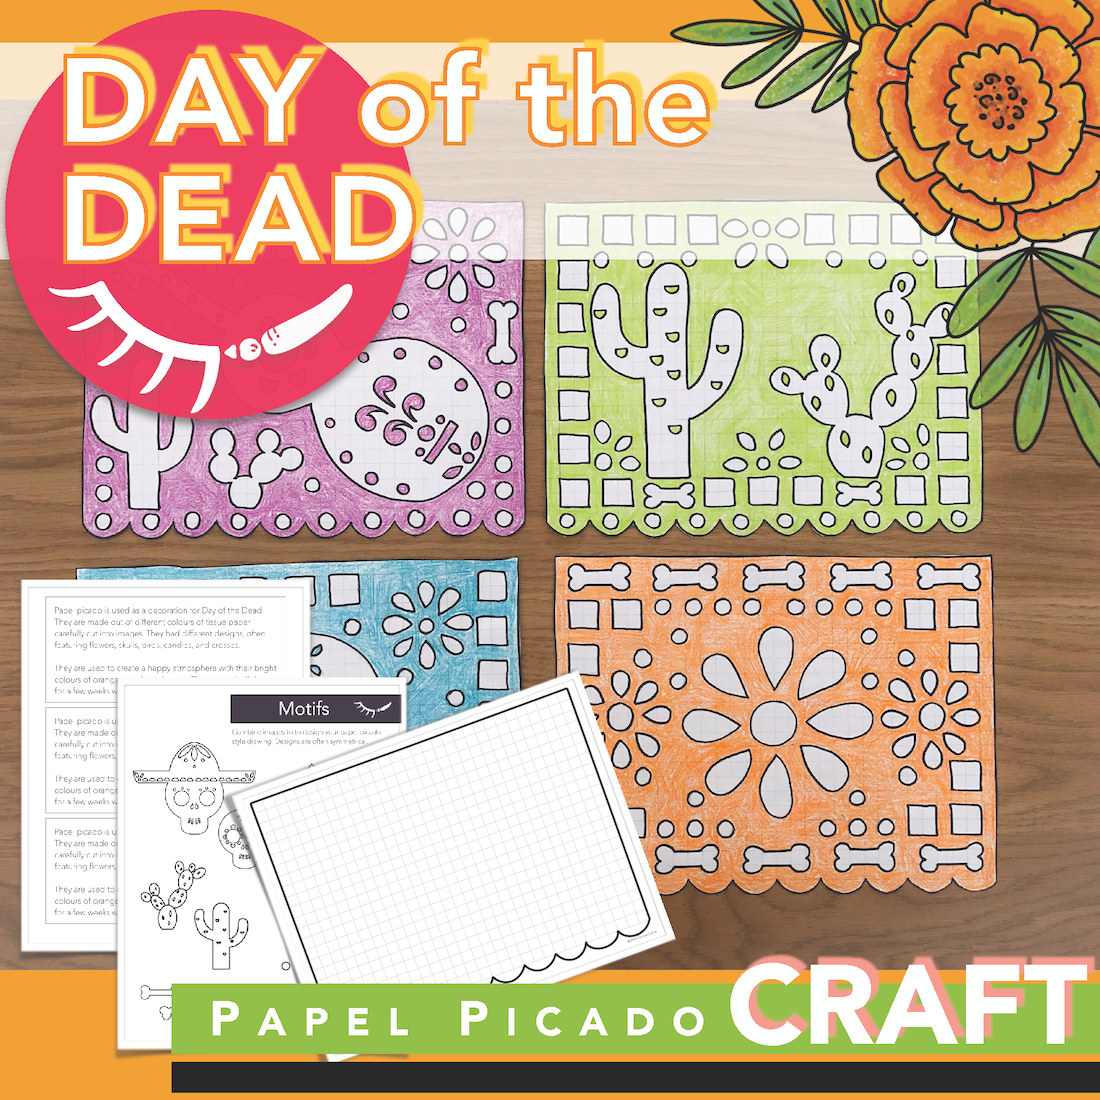 Day of the Dead Craft │The Day of the Dead Coloring Pages